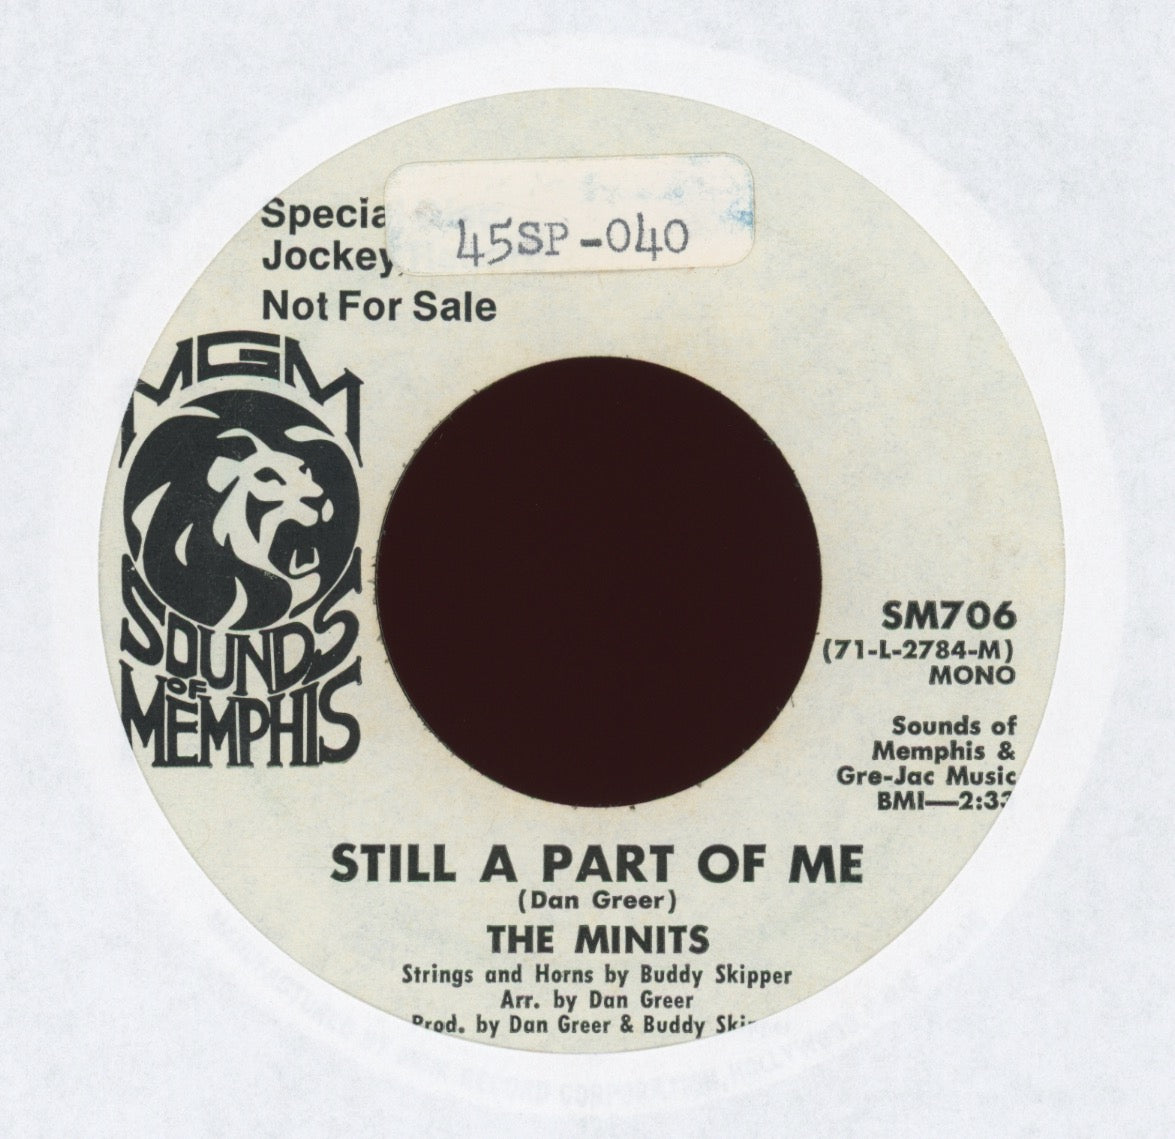 The Minits - Still A Part Of Me Sounds of Memphis Promo